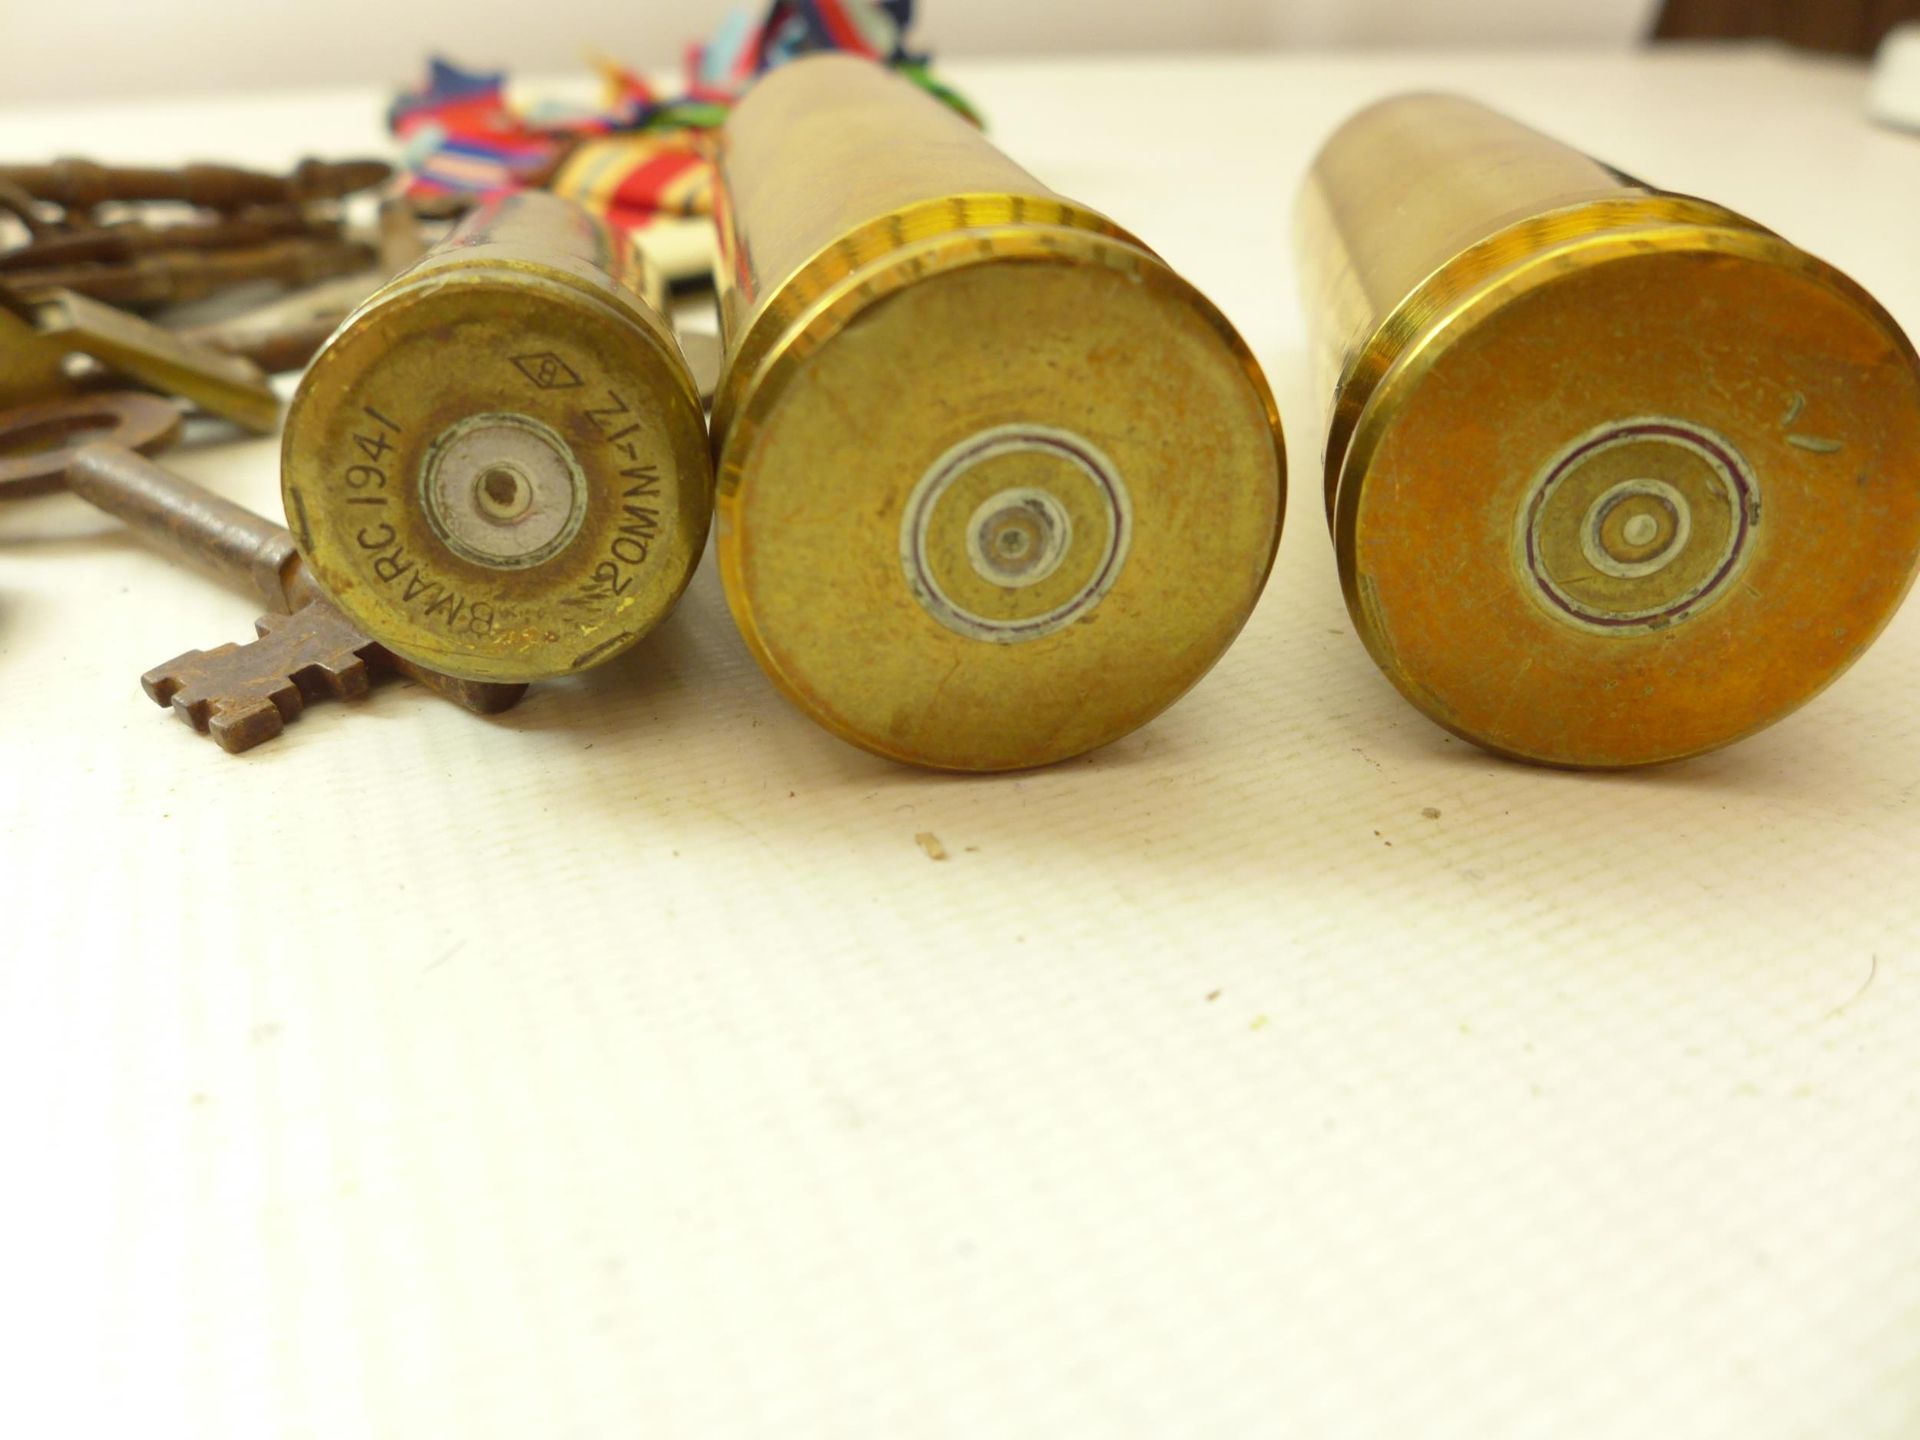 THREE BRASS SHELL CASES, HEIGHTS 7CM TO 11CM, MEDAL RIBBONS, KEYS ETC - Image 3 of 4